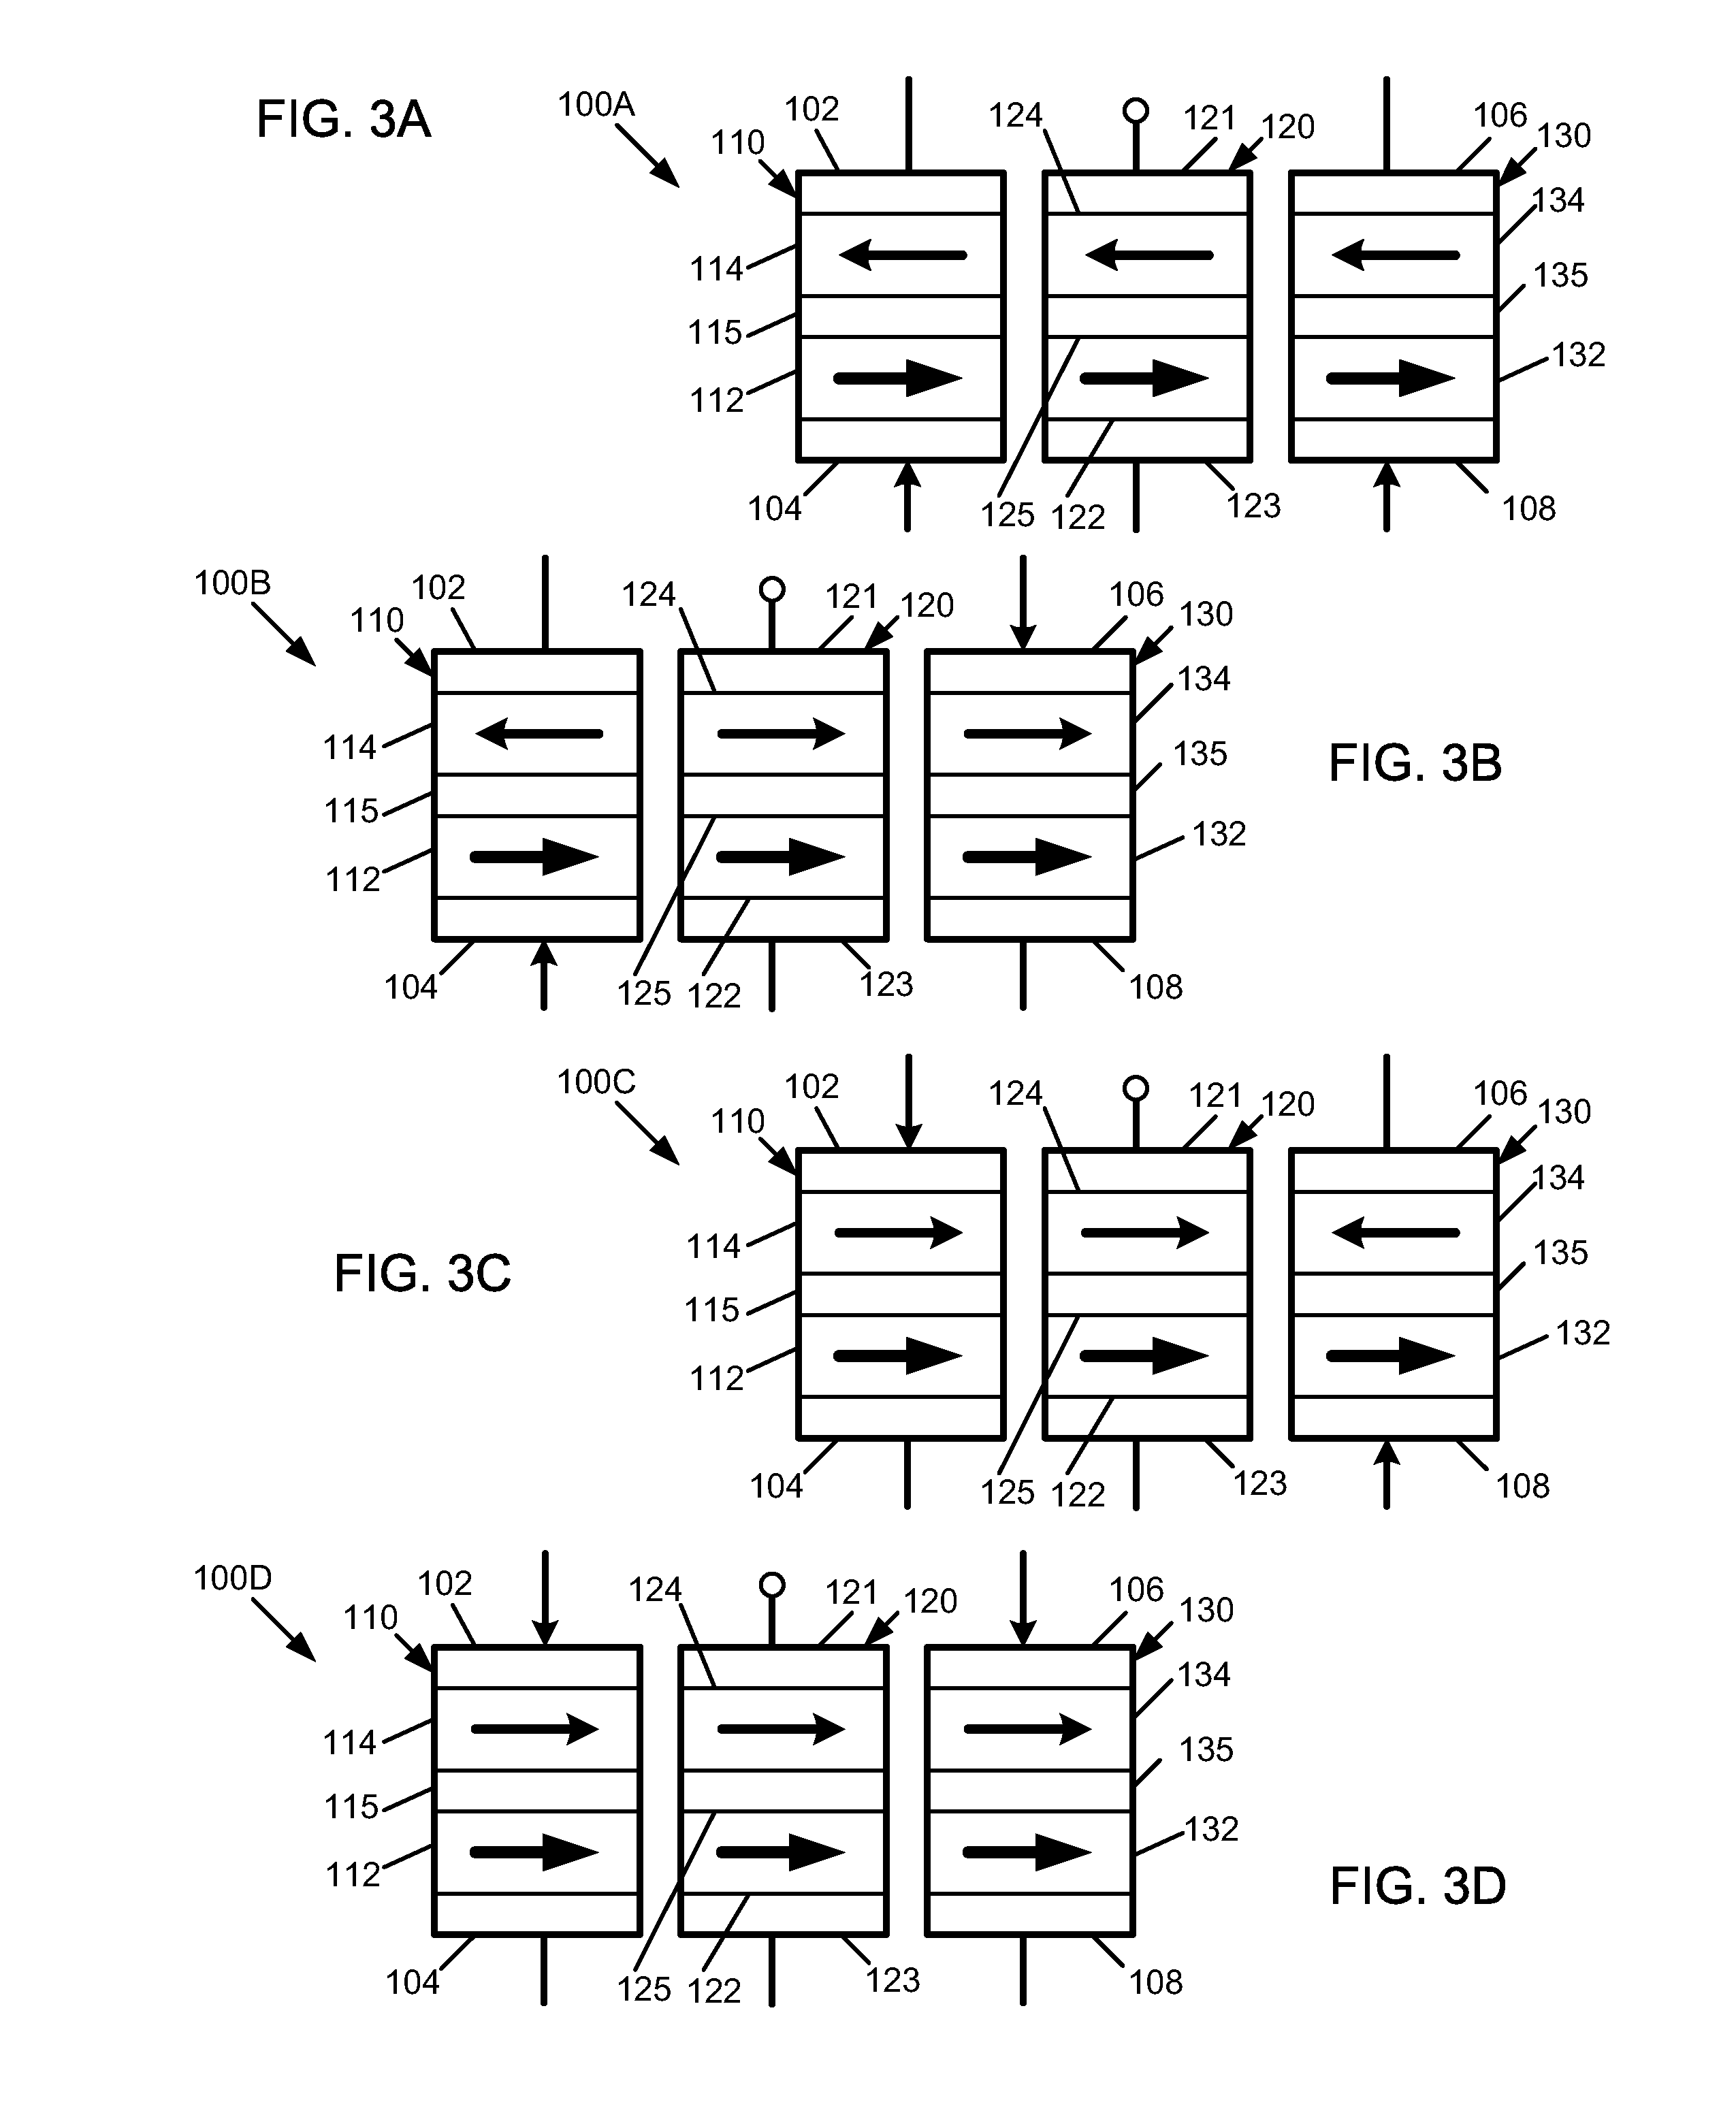 Non-volatile programmable logic gates and adders